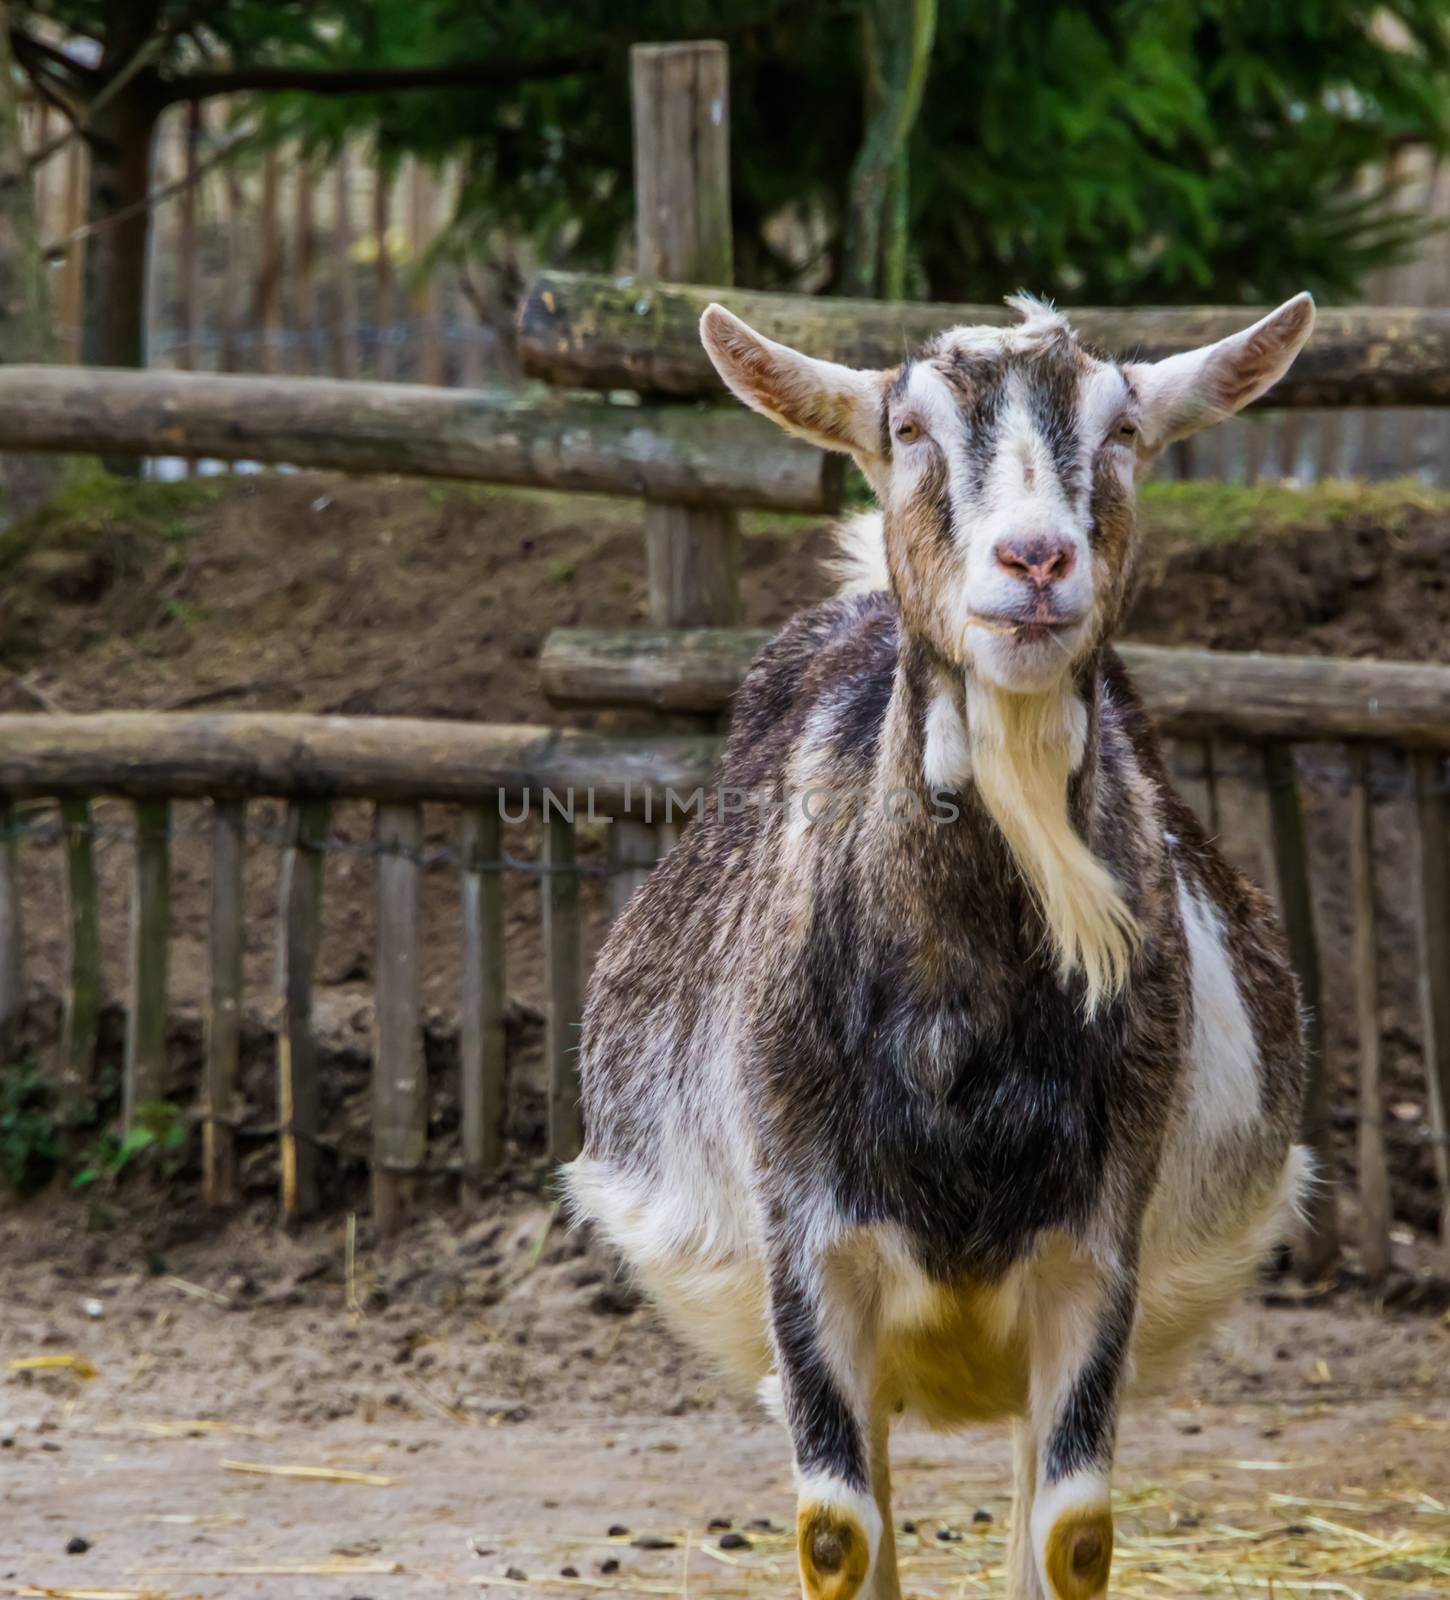 White and grey male goat, buck with a beard, Color variation of a white milk goat, Farm animal by charlottebleijenberg